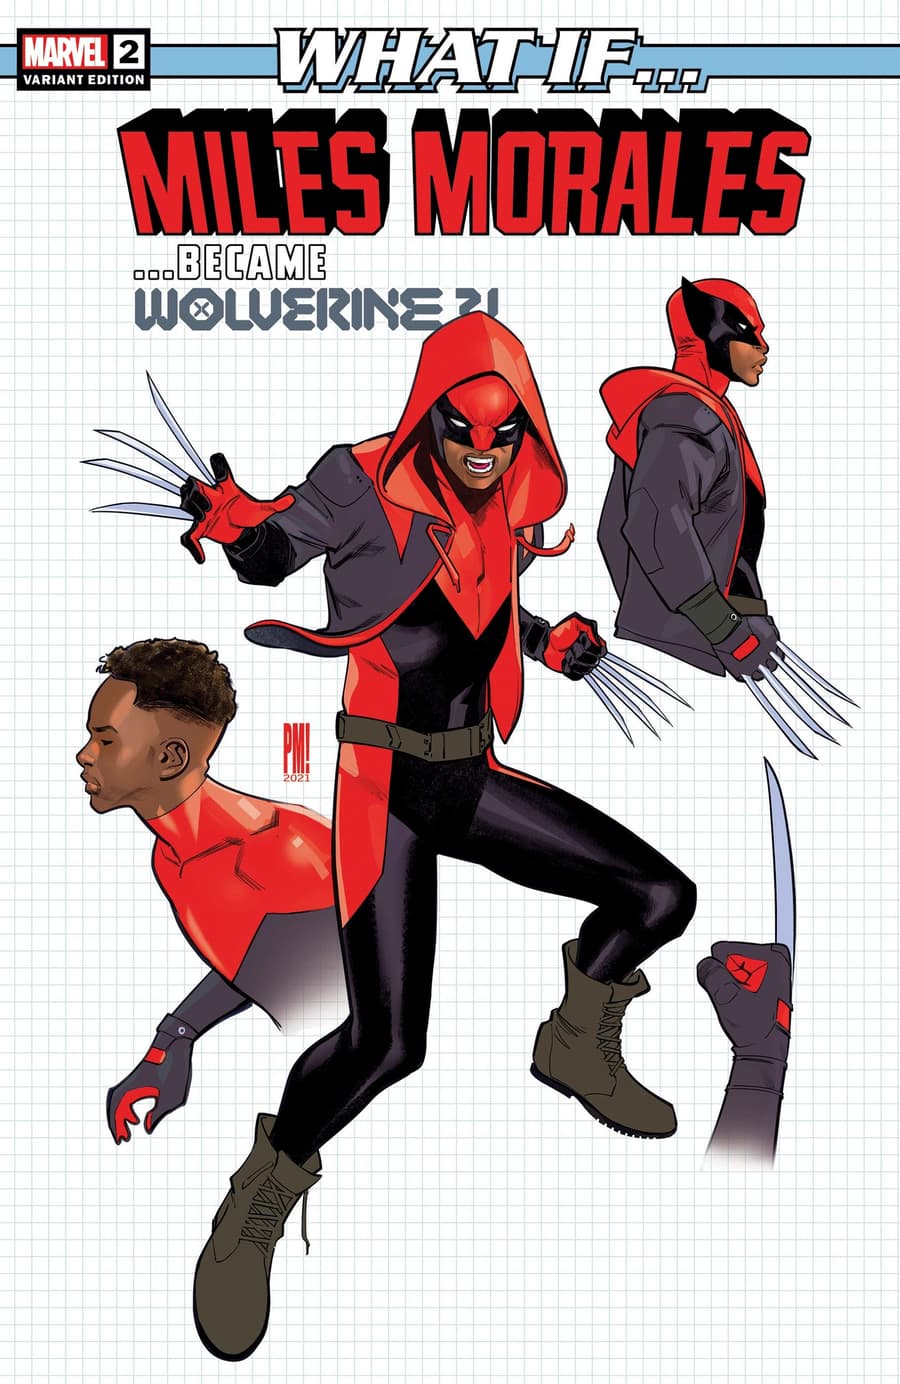 Medina’s design variant to WHAT IF...? MILES MORALES (2022) #2.